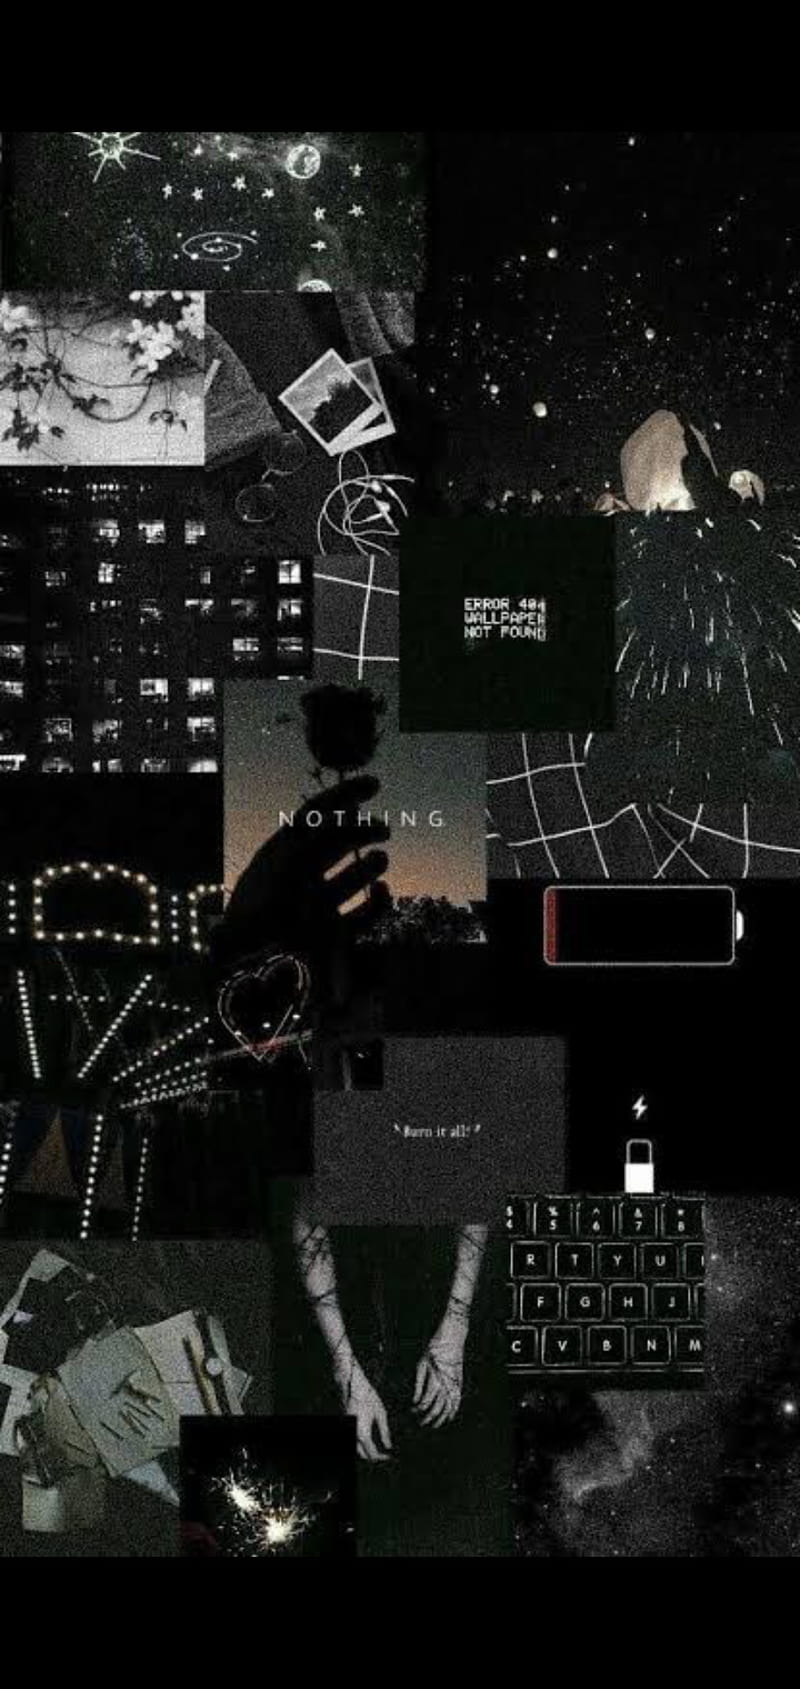 Black aesthetic wallpaper, photo collage of different photos, dark background, black and white photos of the city - Grunge